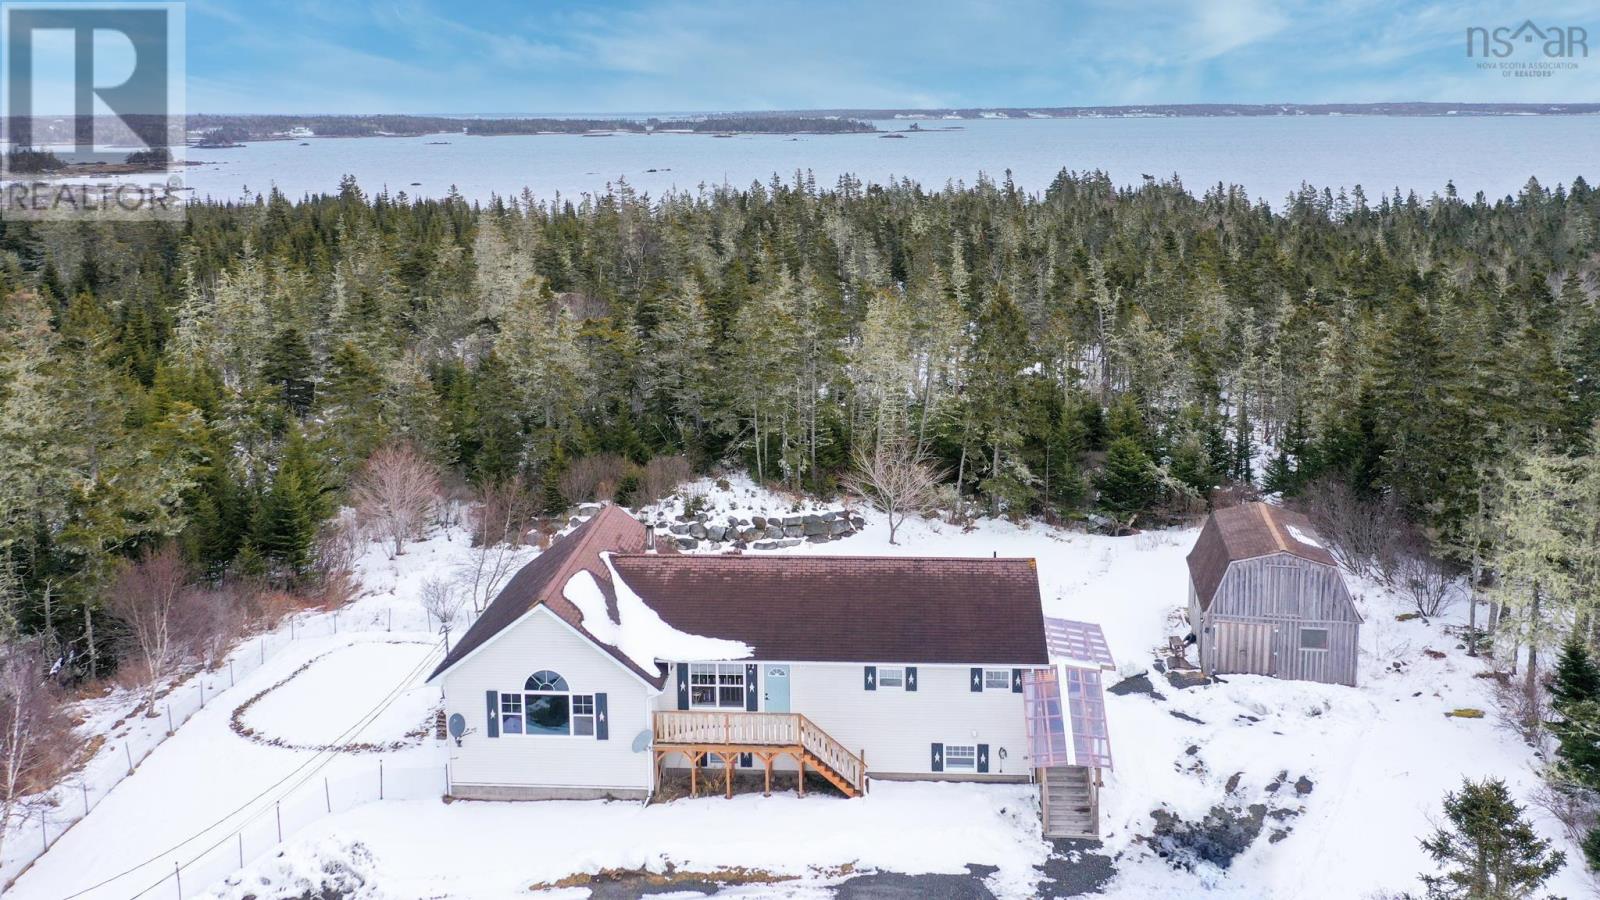 113 Bear Point Road located in Shag Harbour, Nova Scotia